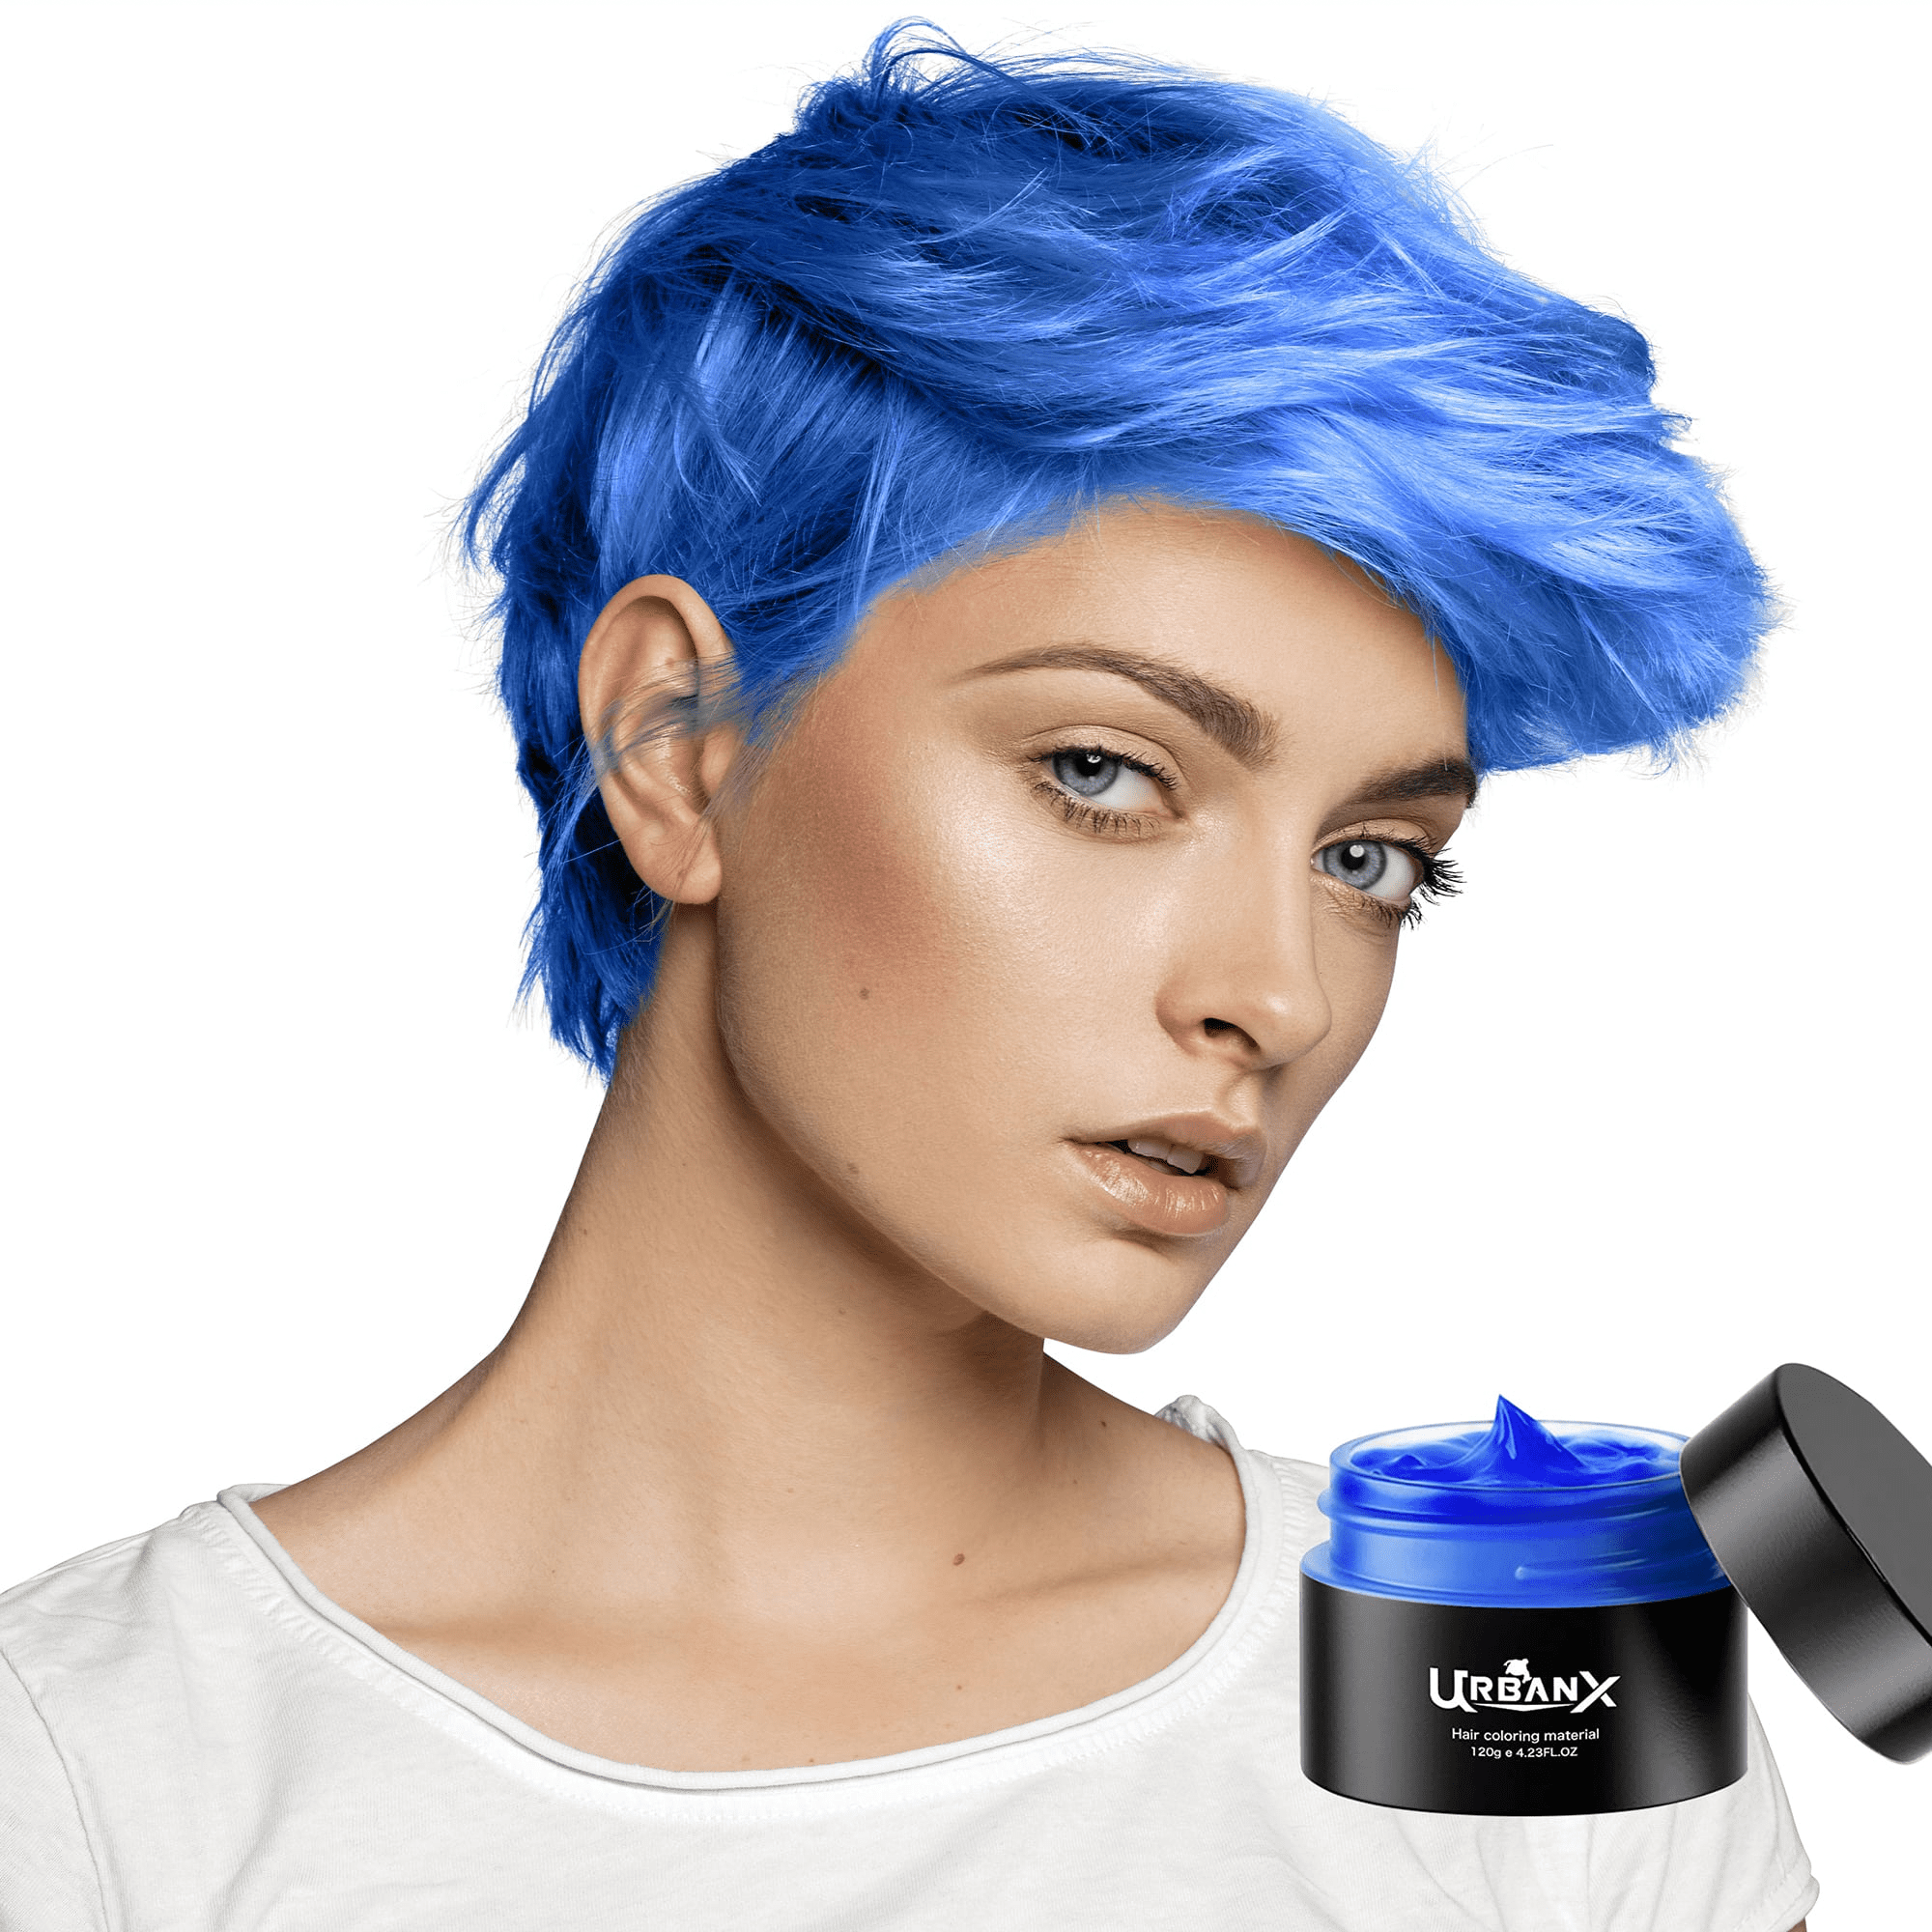 UrbanX Washable Hair Coloring Wax Material Unisex Color Dye Styling Cream  Natural Hairstyle for Pixie Hair Cut Pomade Temporary Party Cosplay Natural  Ingredients - Blue 